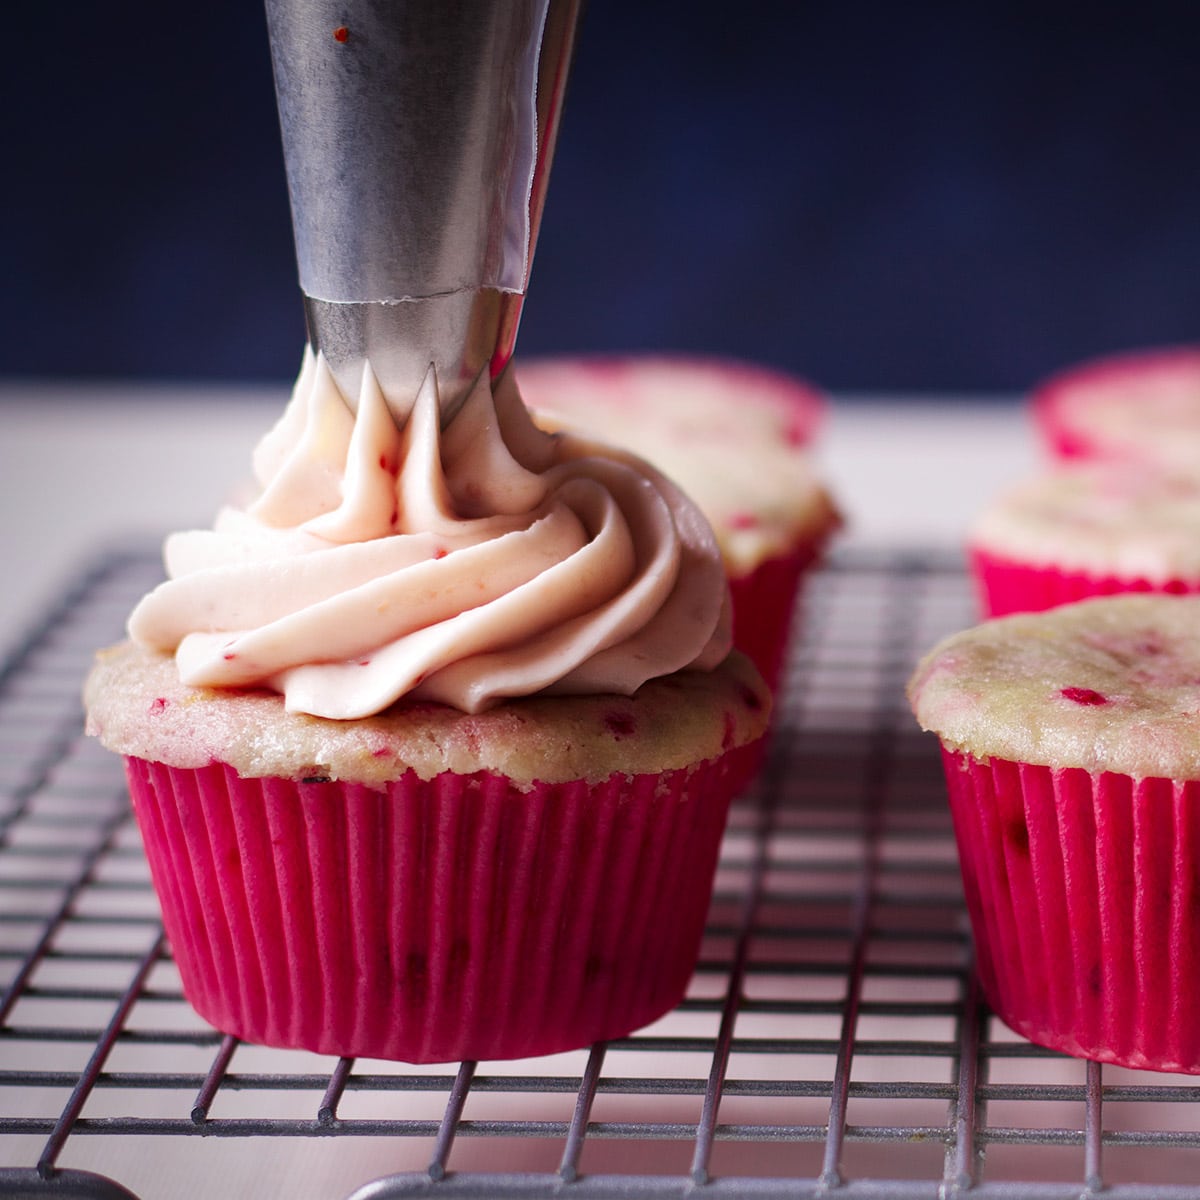 Using a pastry bag and cupcake tip to pipe a swirl of raspberry cream cheese frosting on a raspberry cupcake.